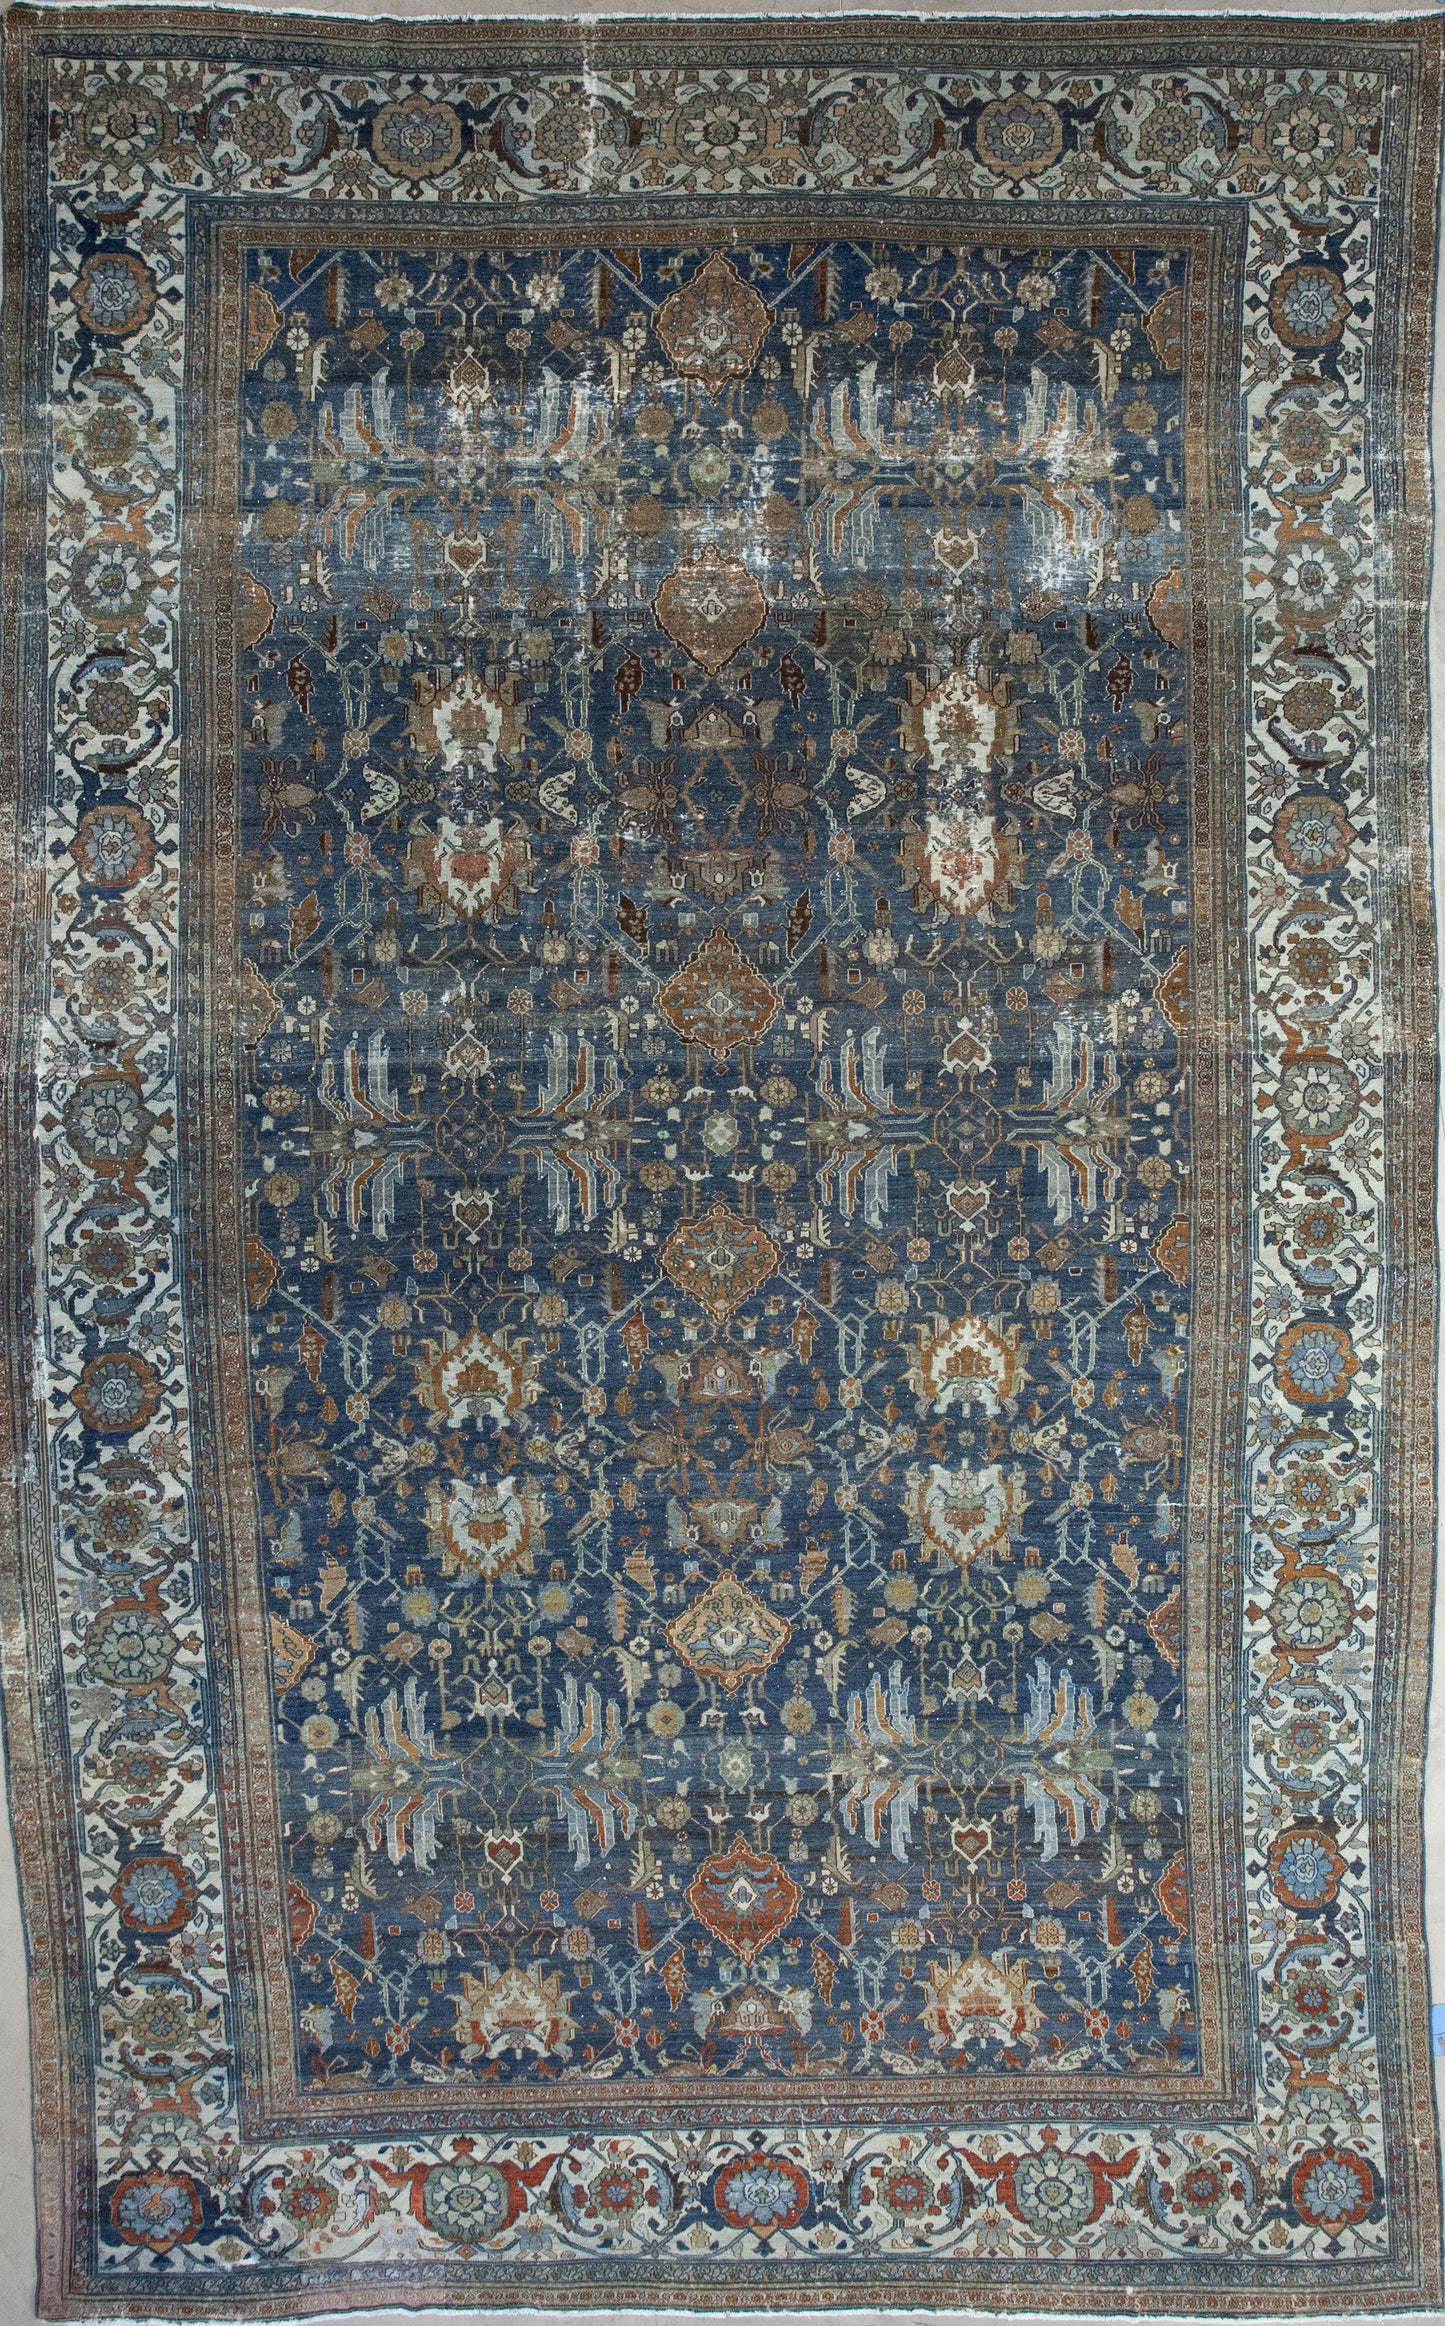 Grandiose Antique rug with an elegant color scheme in blue, white, brown, and gray.